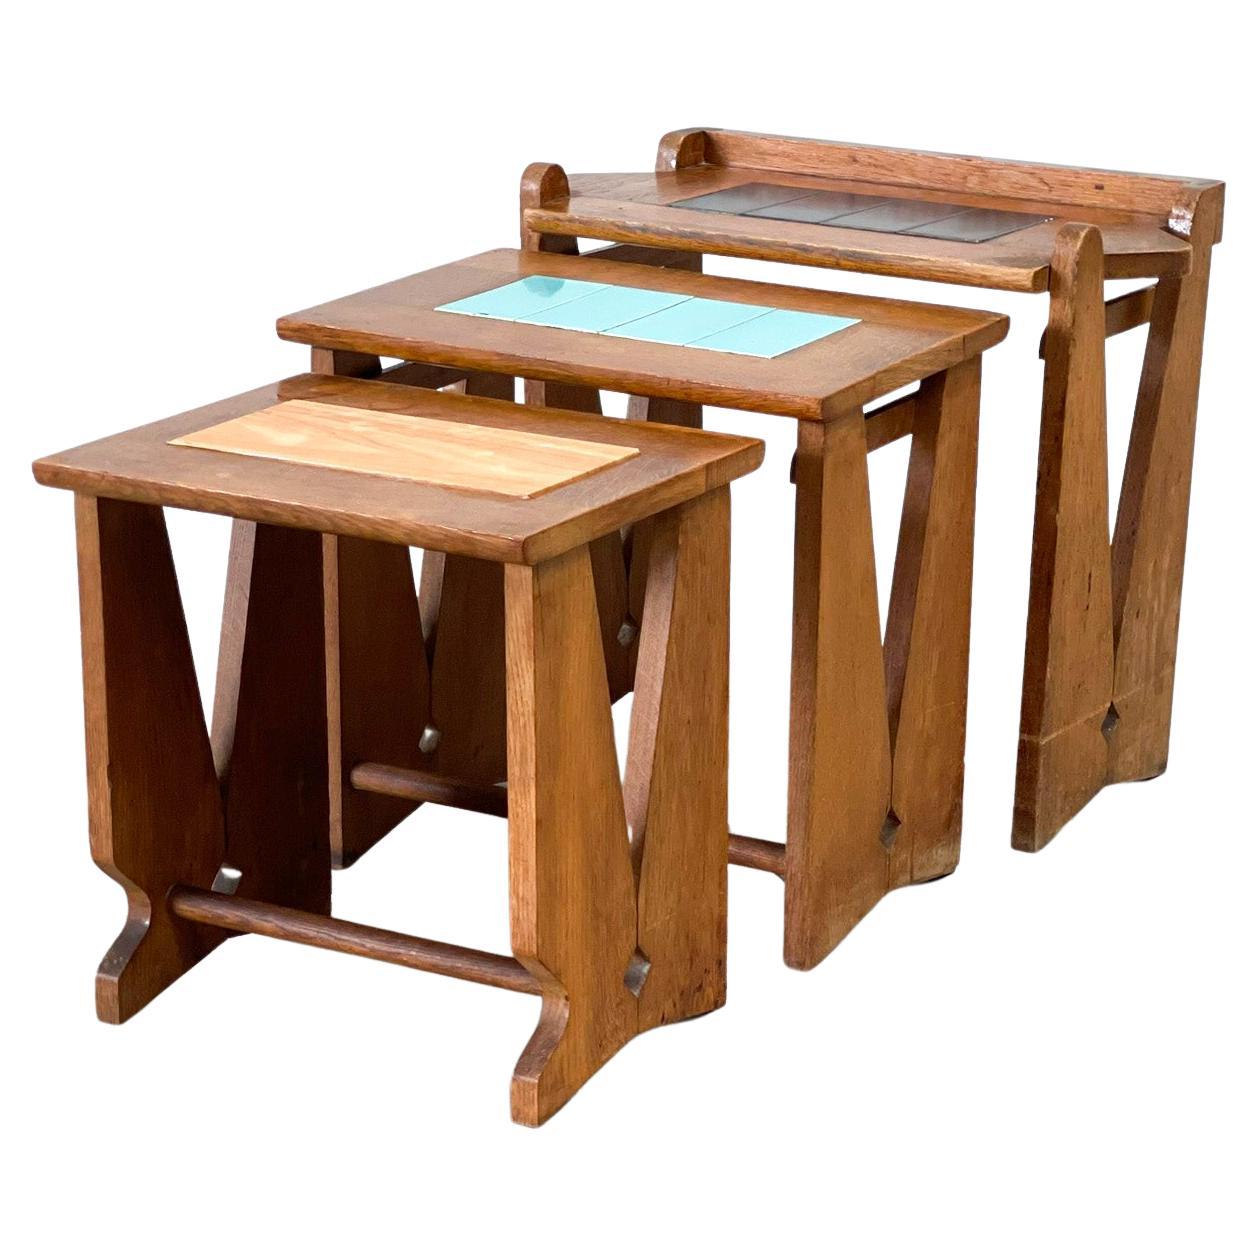 Guillerme & Chambron Nesting Tables